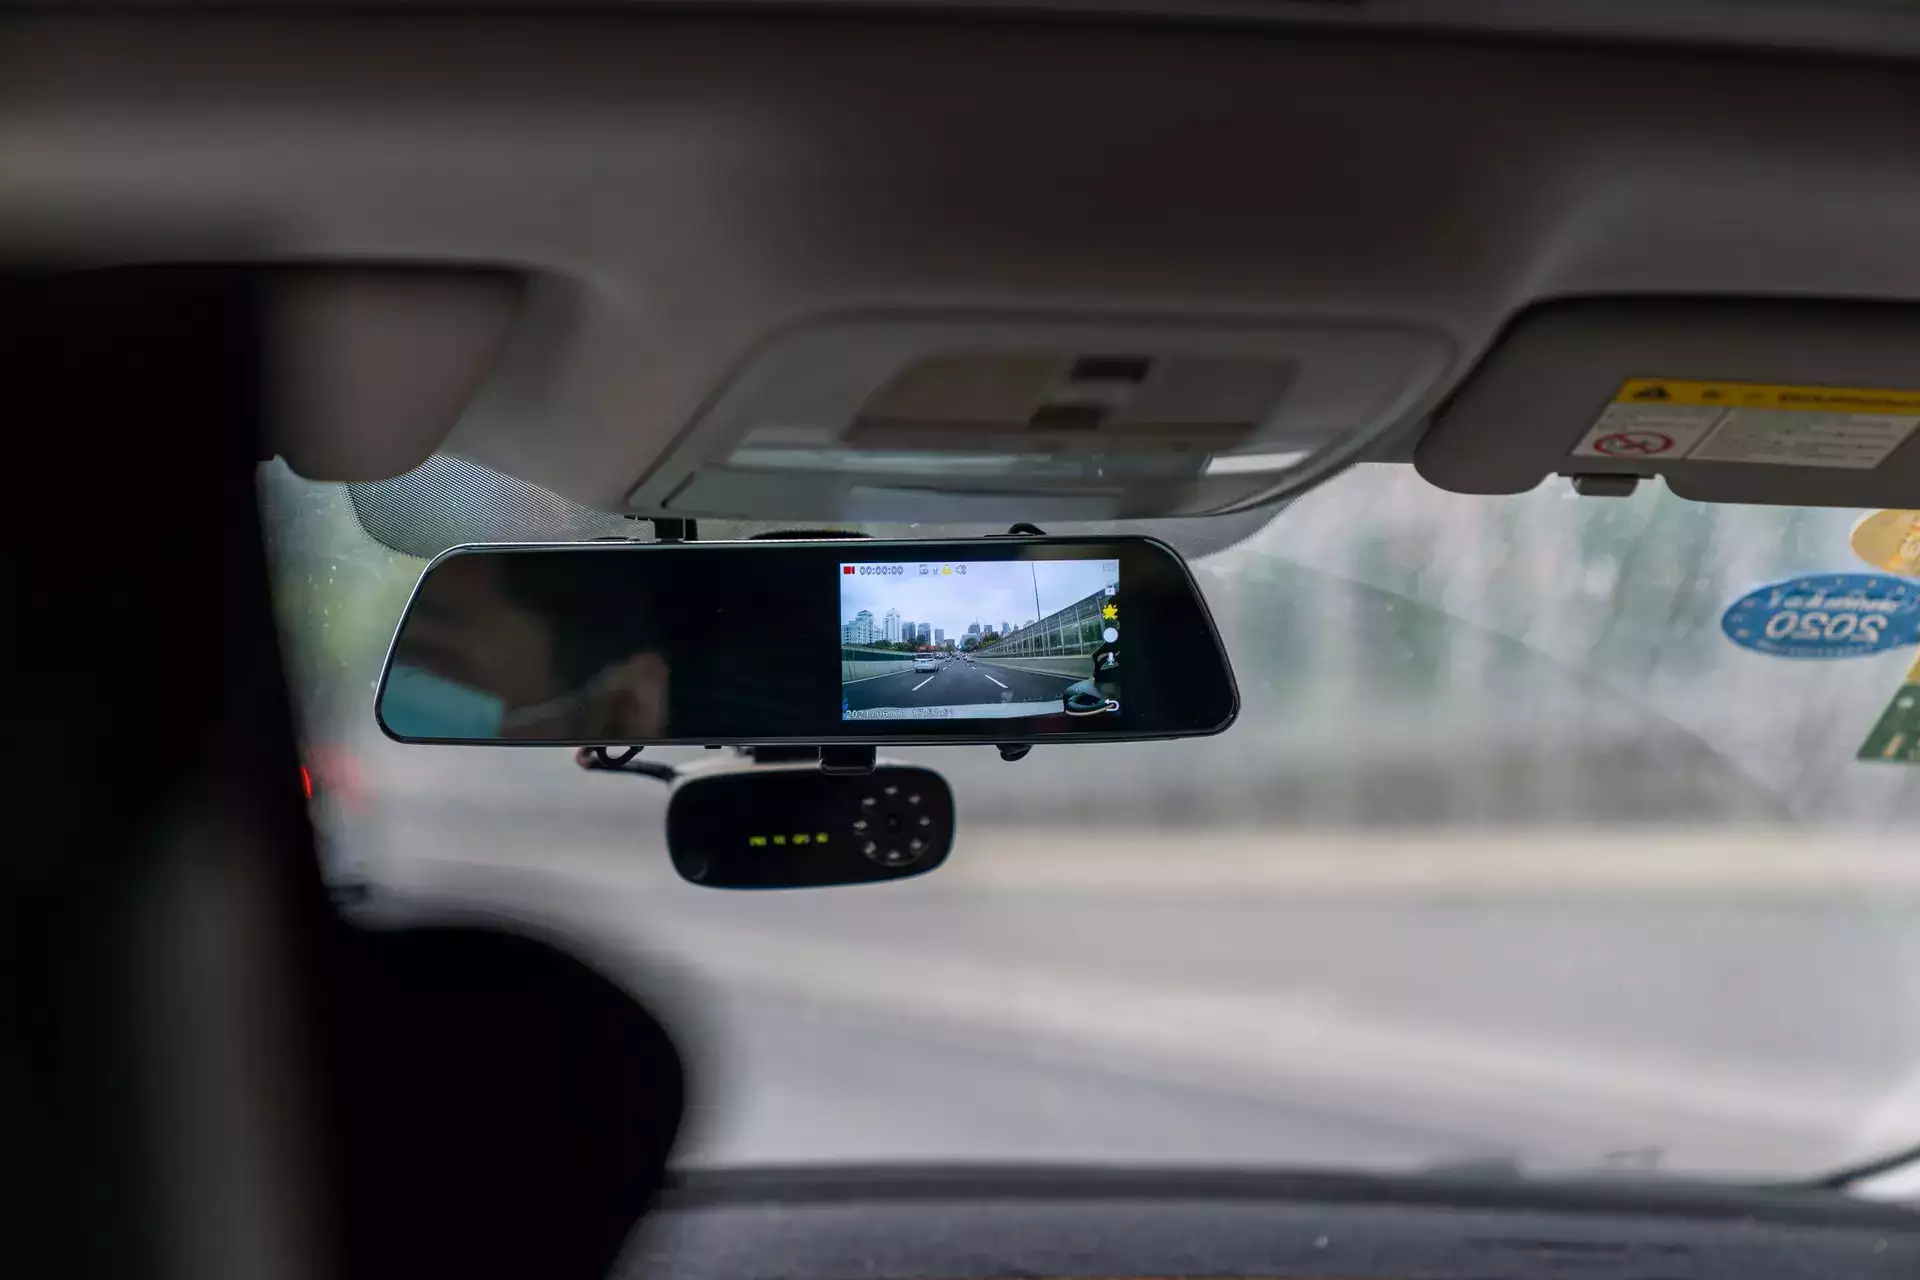 Crystal Clear Recordings: Quadruple Lens Dash Cams for License Plate Clarity